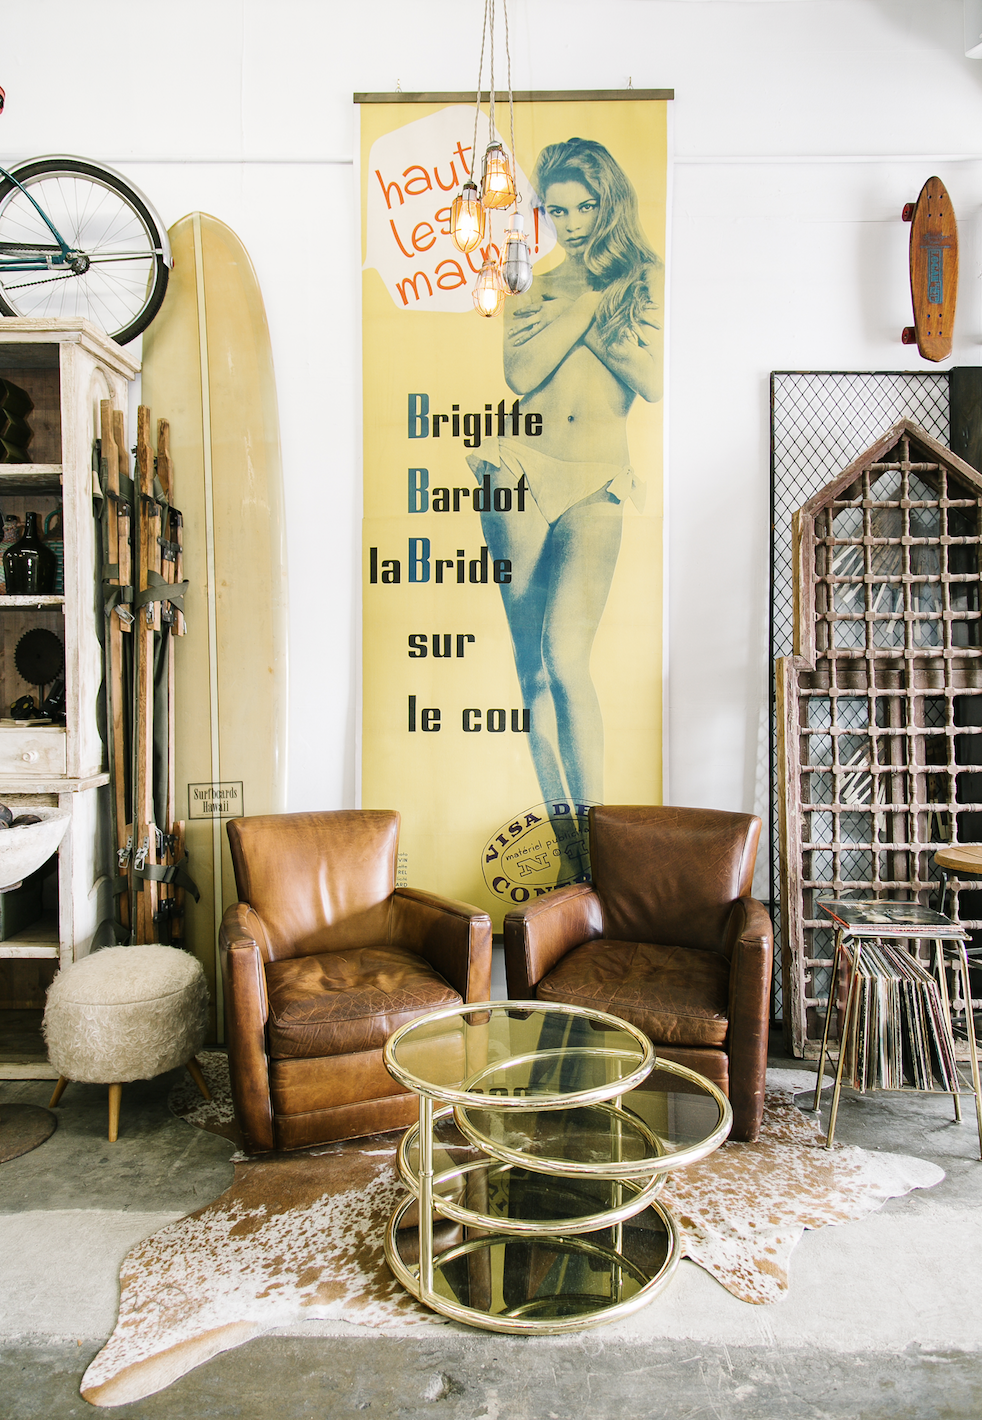 A Tour of the Eclectic and Amazing American Vintage House